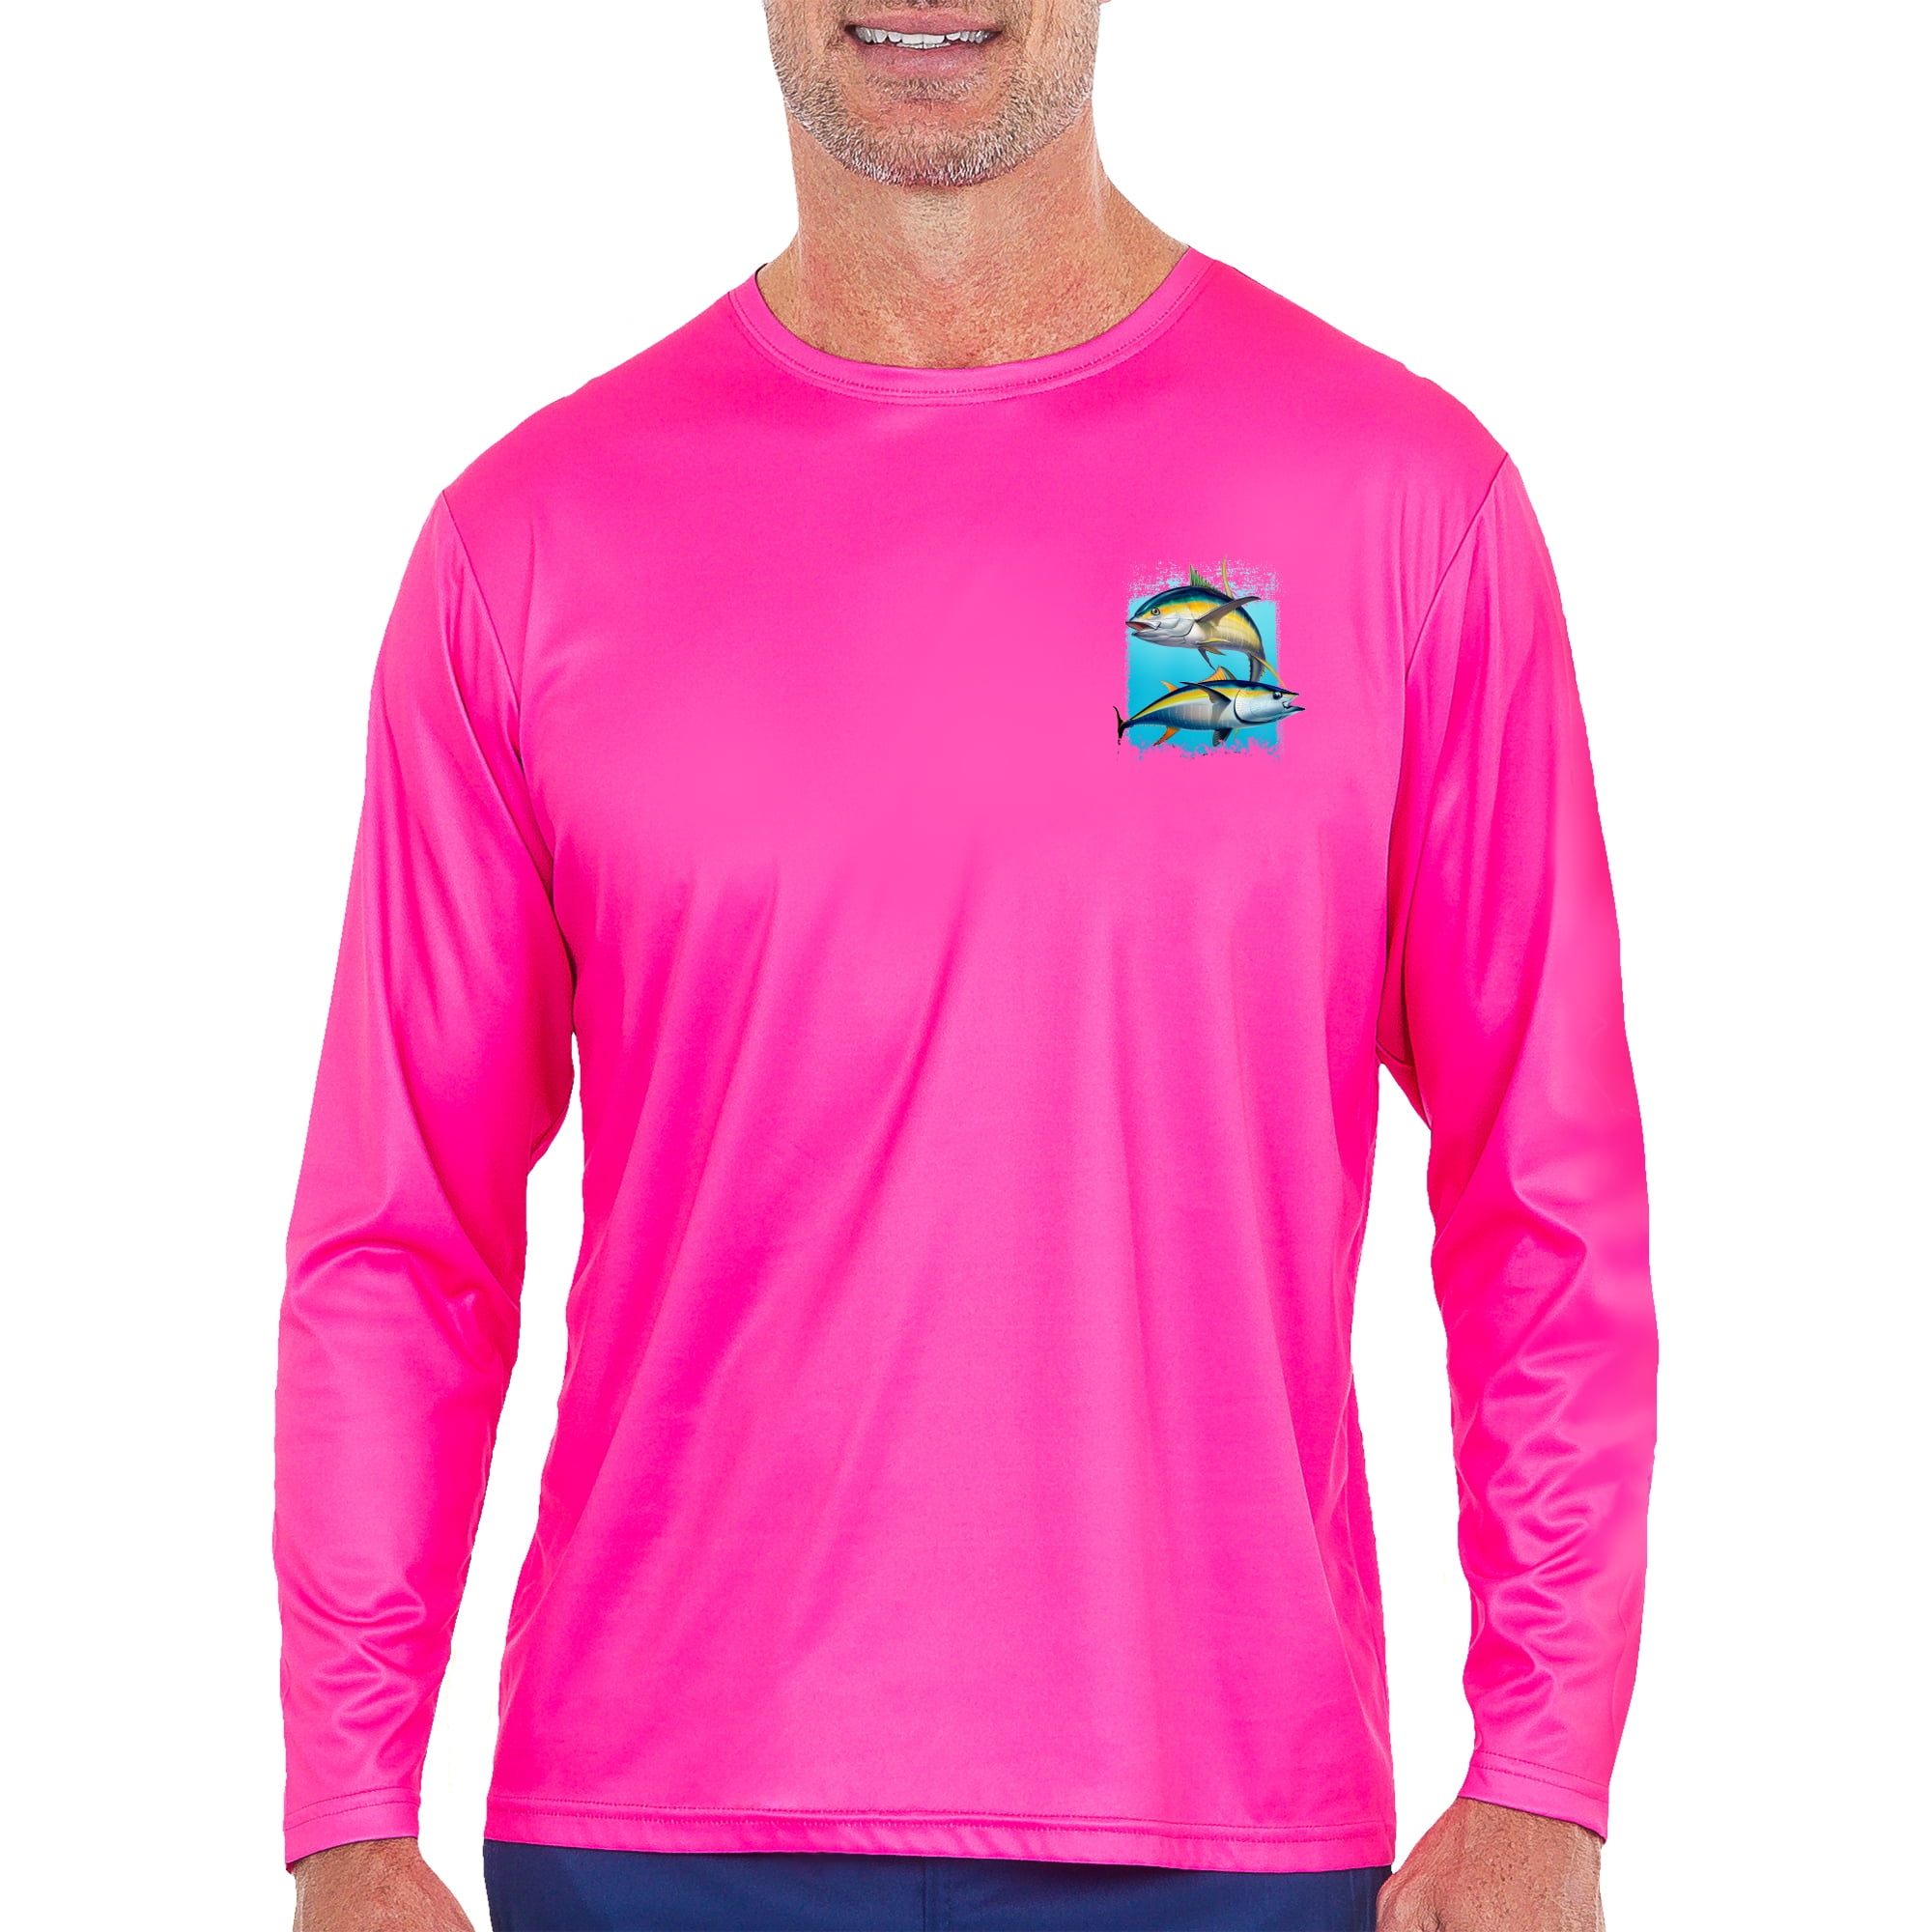 UZZI Pink Men's Tuna Long Sleeve Dri Fit, UPF30, Sea Designs, Bright and  Fun Colors for Beach and Outdoor